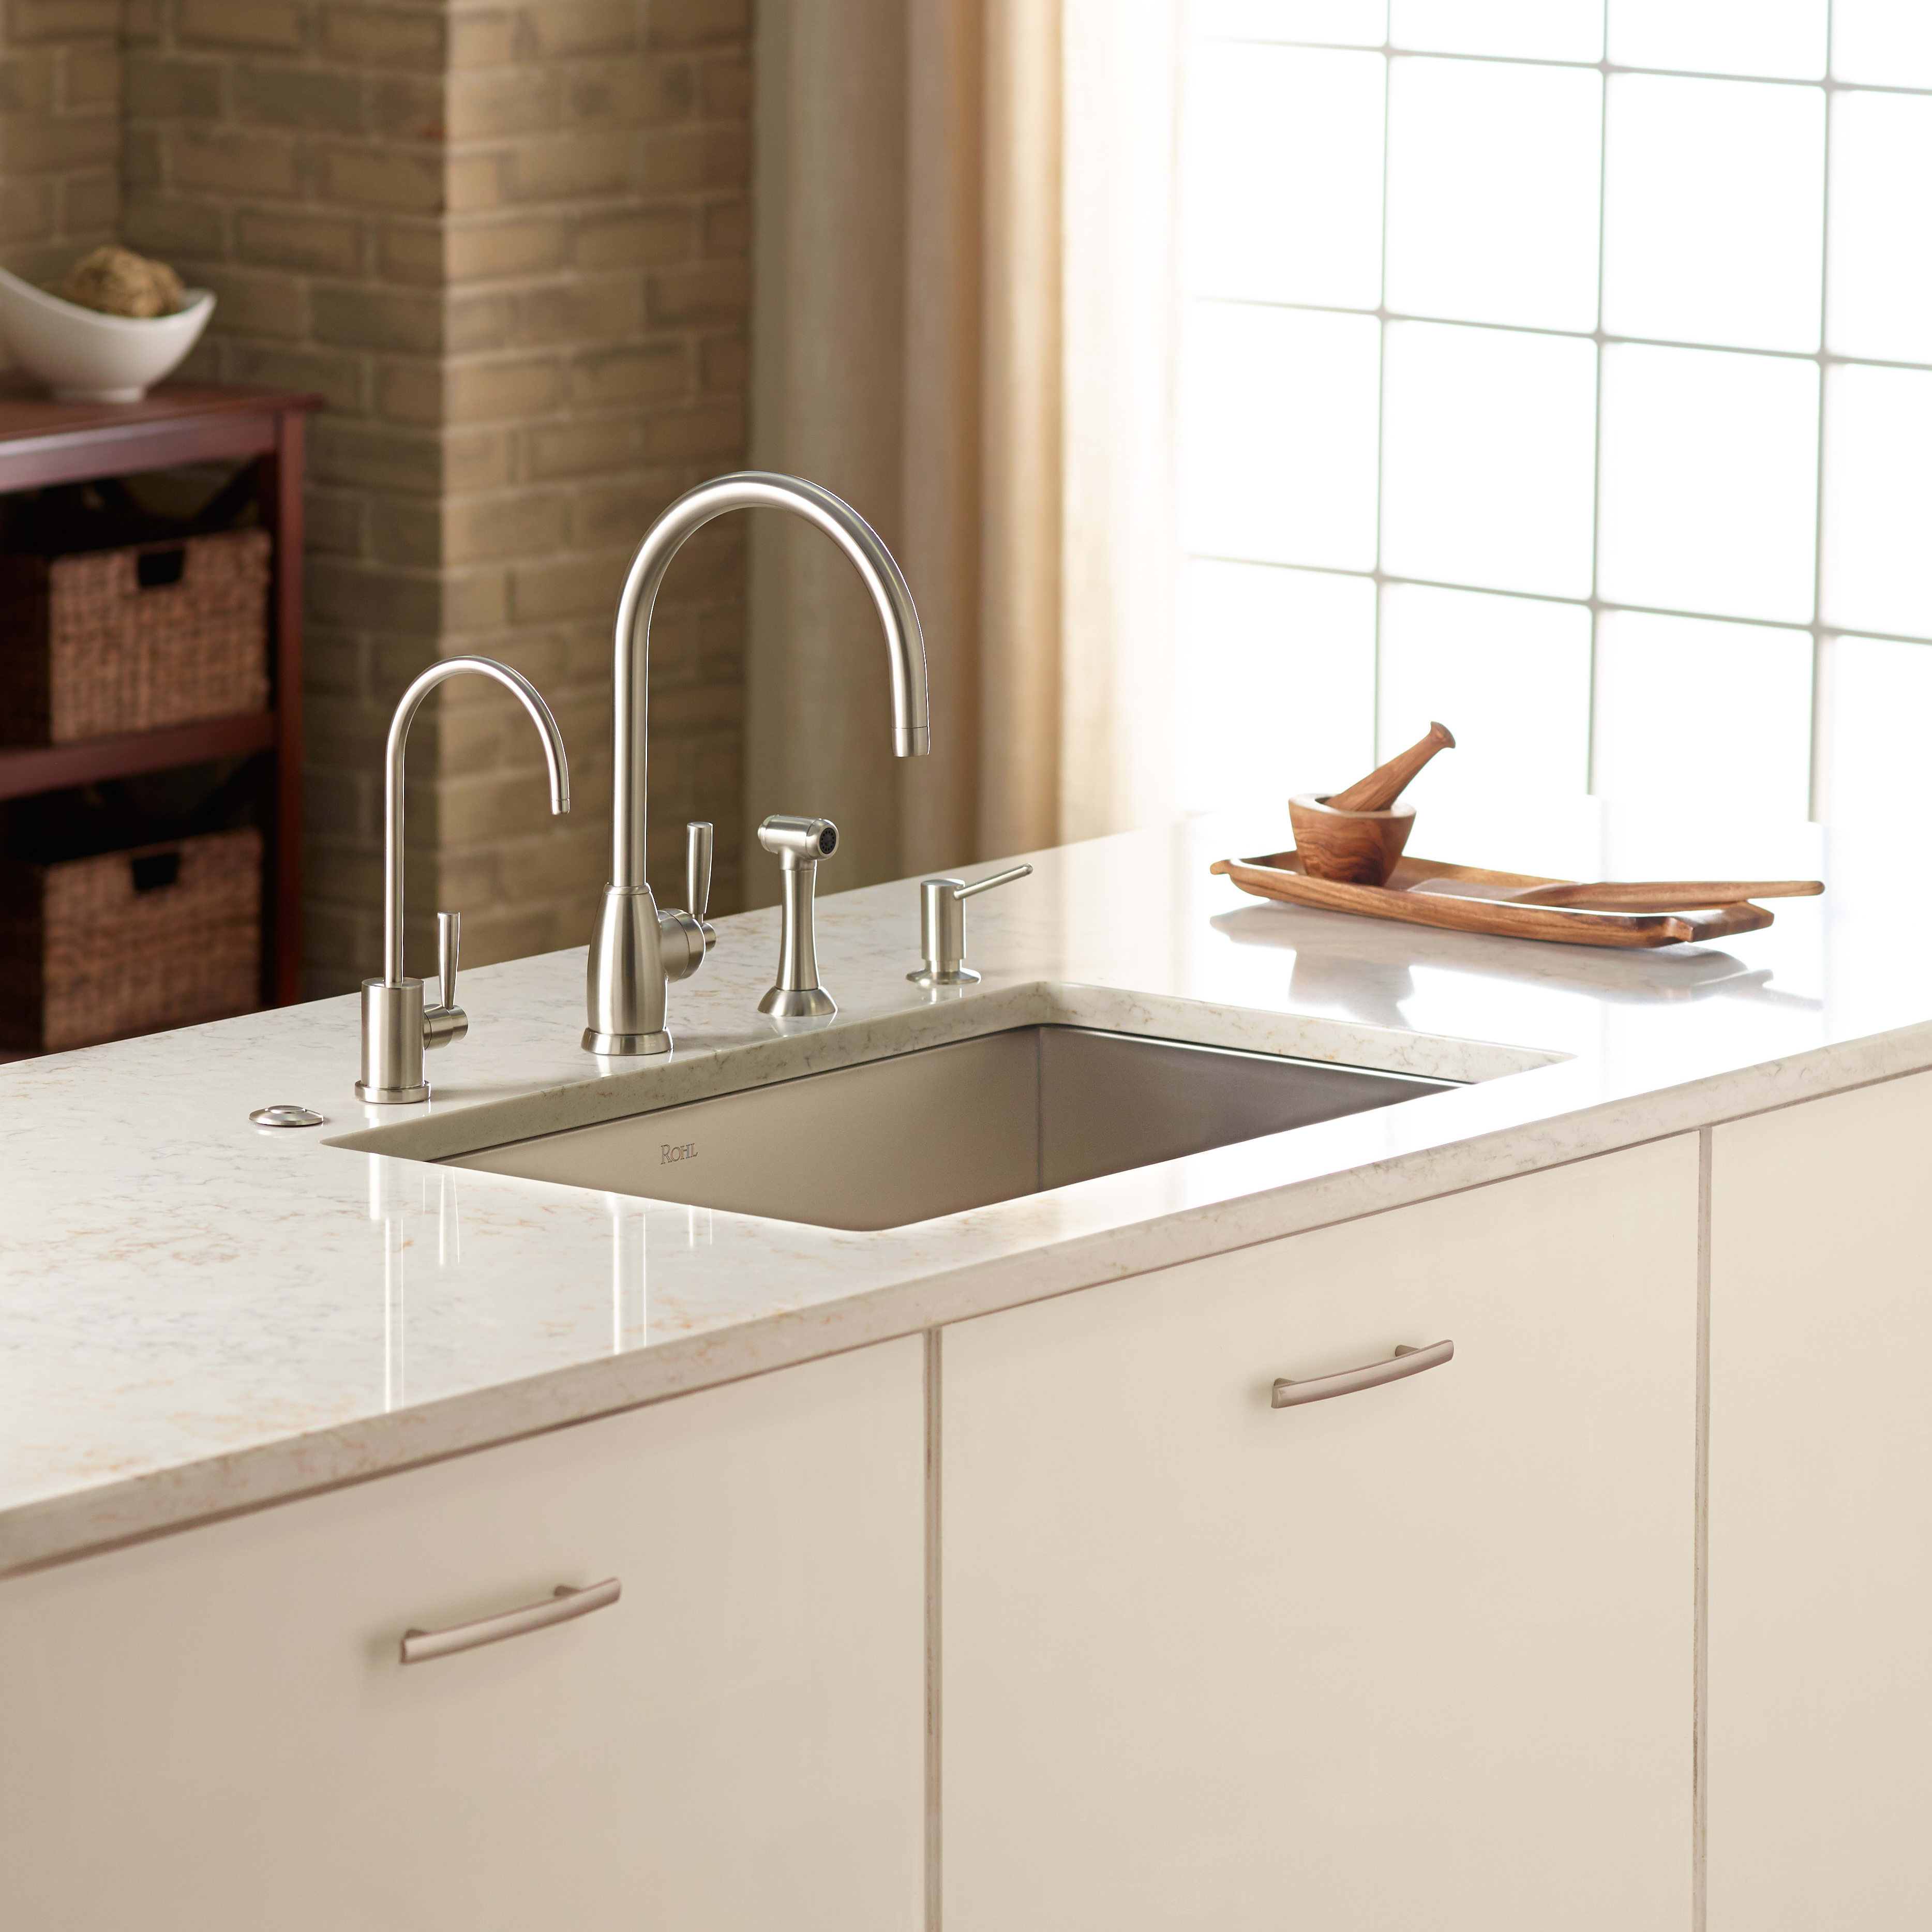 Rohl U.4846LS Perrin  Rowe Holborn Contemporary Single Hole Kitchen Faucet  With "C" Spout And Sidespray